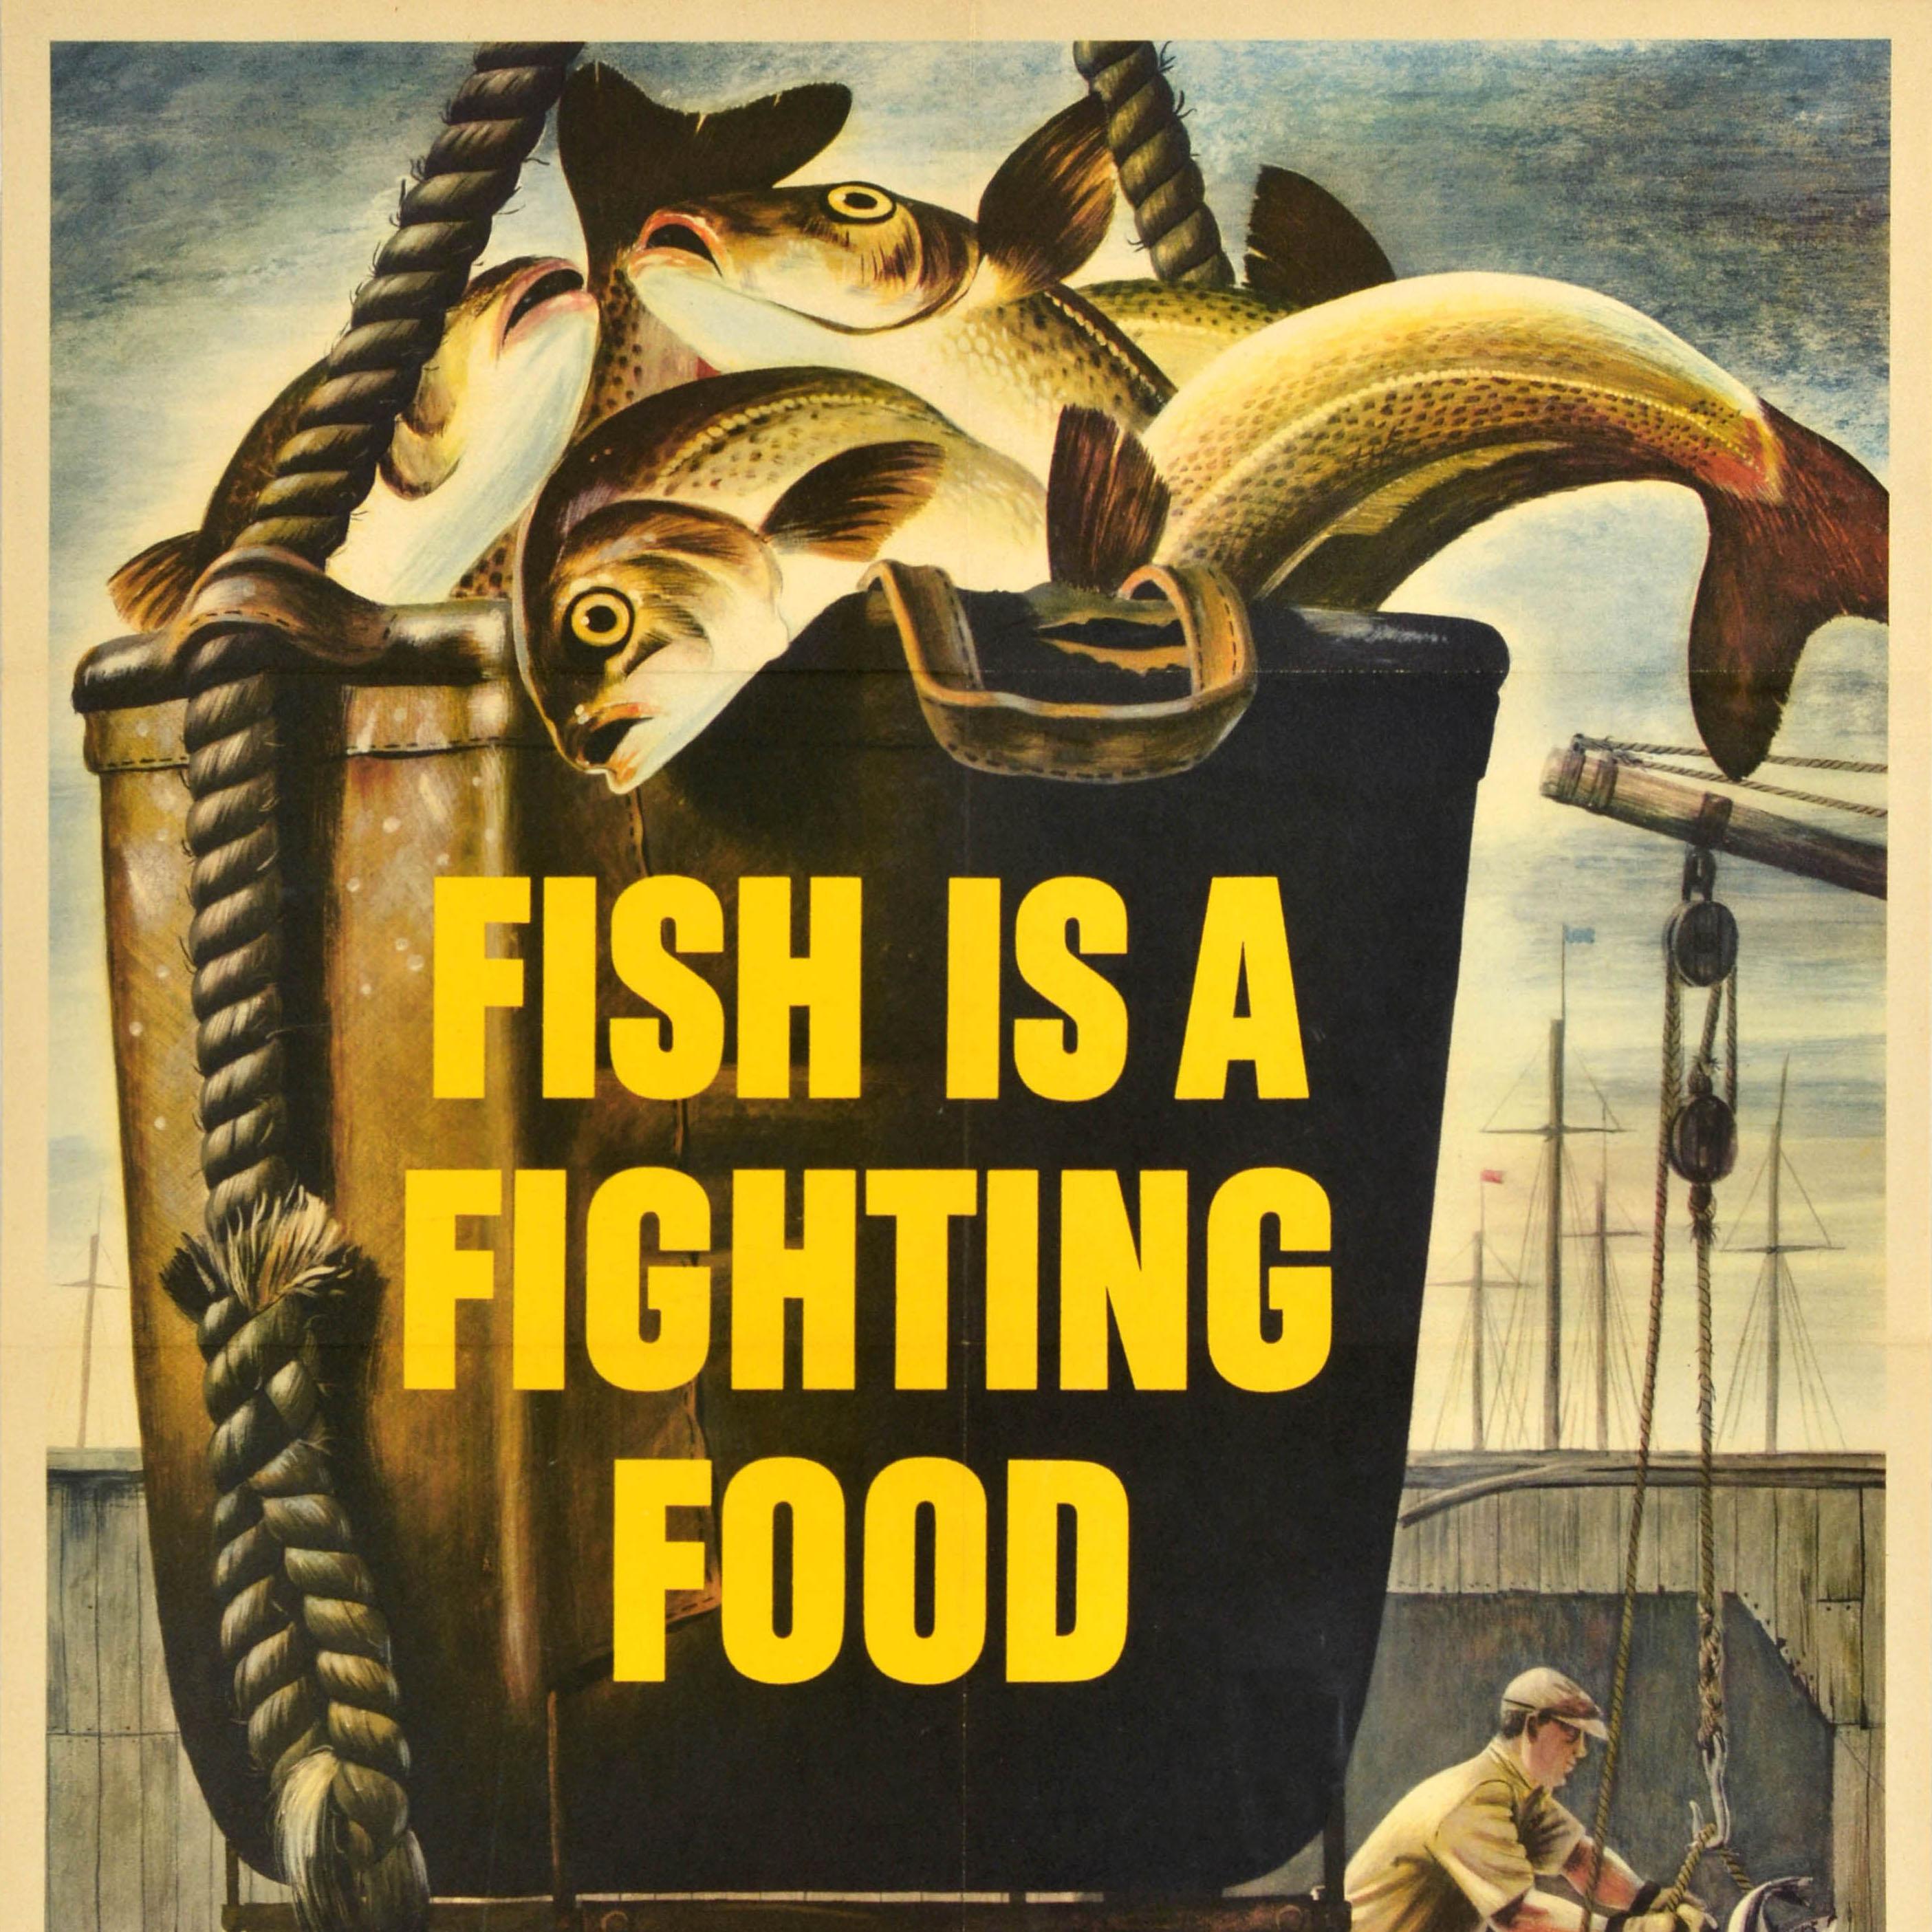 American Original Vintage War Home Front Poster Fish Is A Fighting Food Rationing WWII For Sale